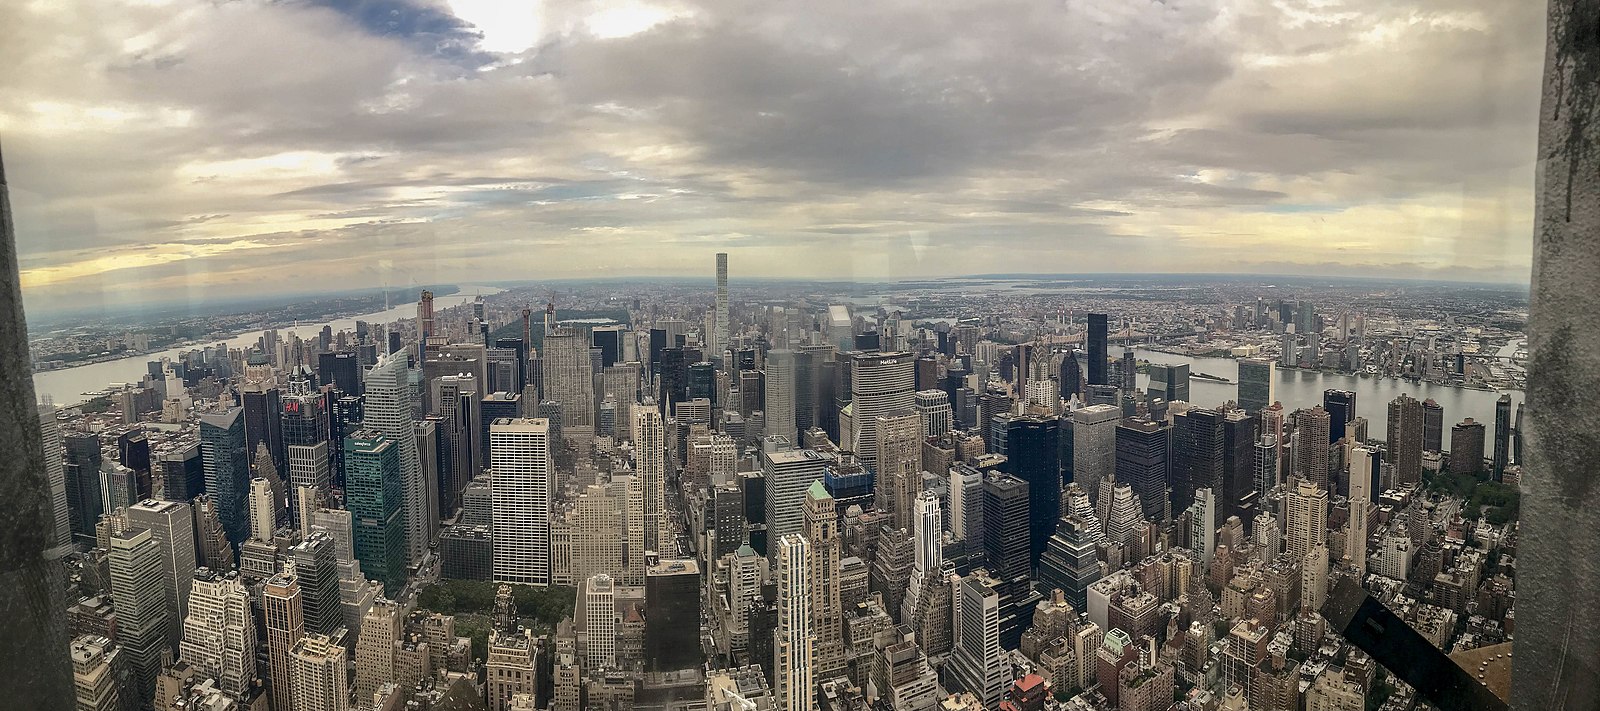 Manhattan from the Empire State Building. Source: Andrew nyr